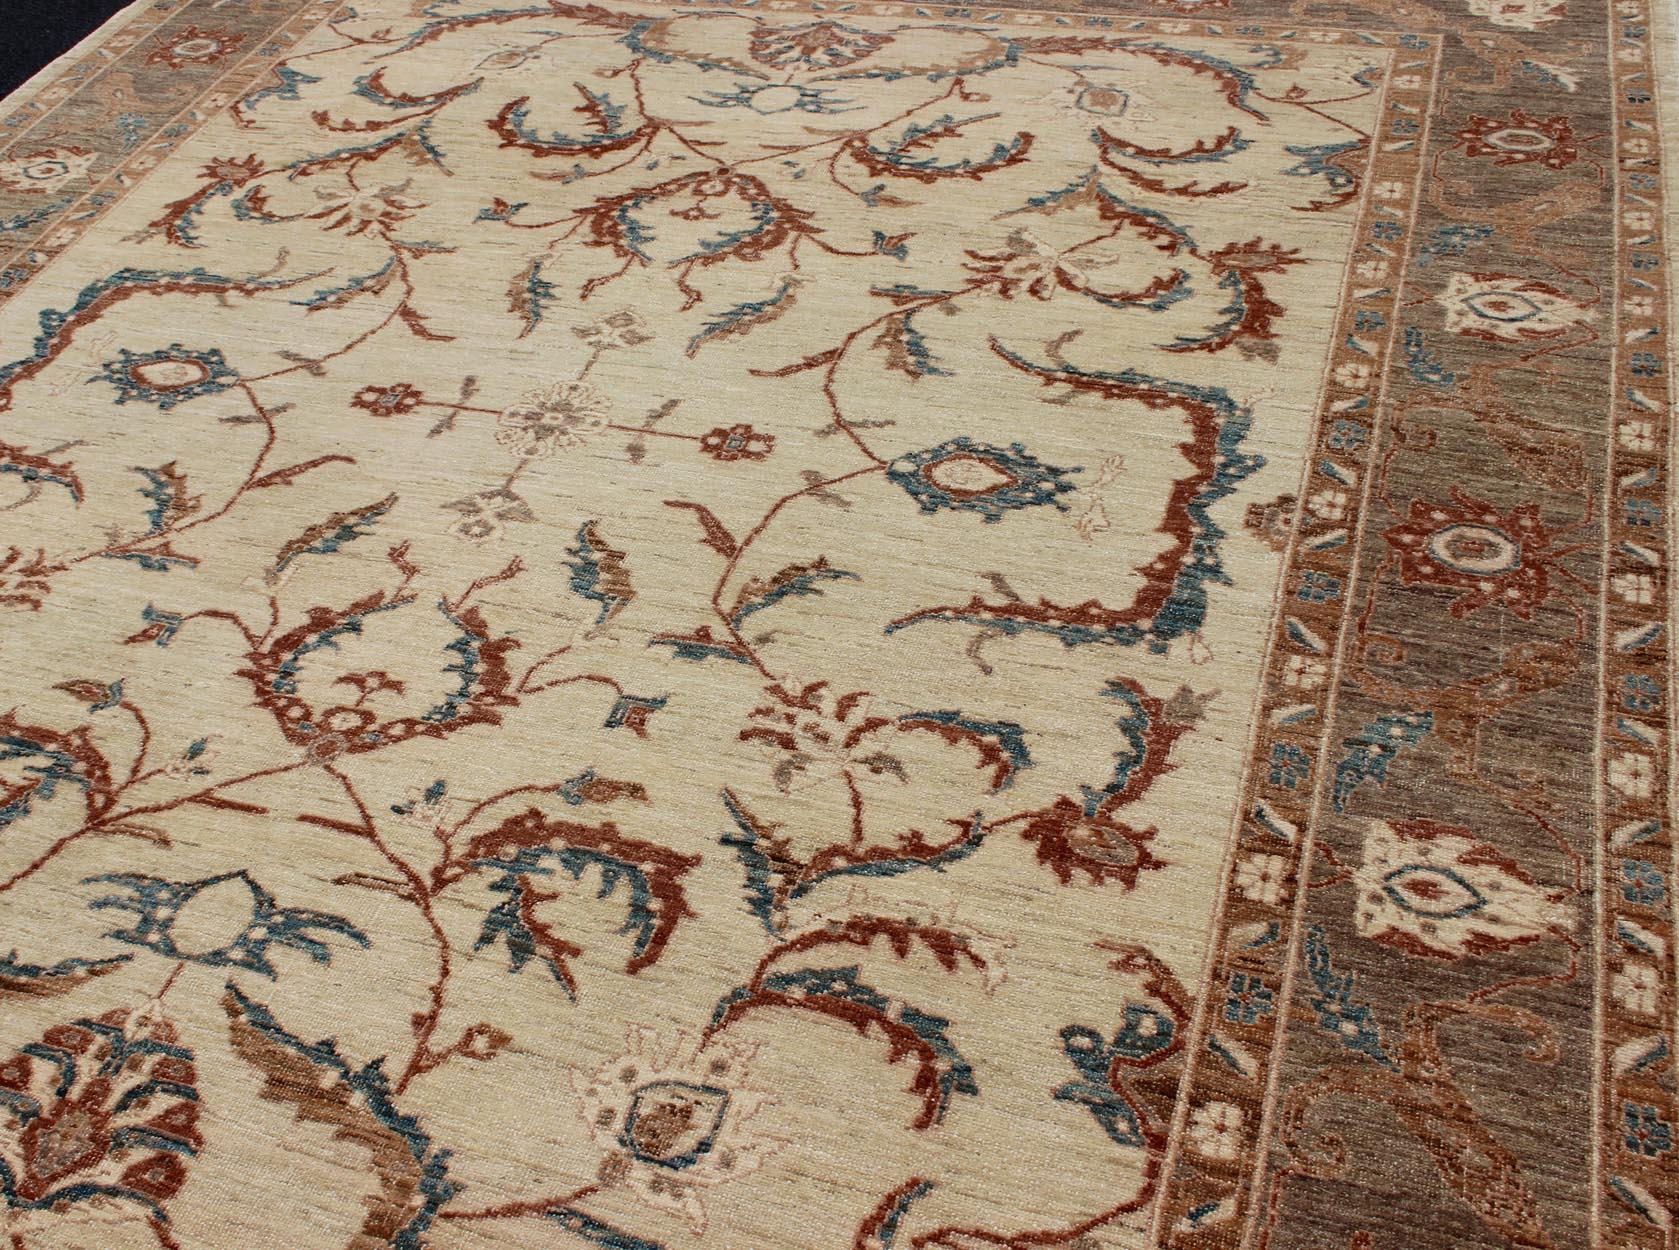 Hand-Knotted Fine Afghanistan Made Rug in Earthy Tones of Brown, Taupe, Blue, and Coral For Sale